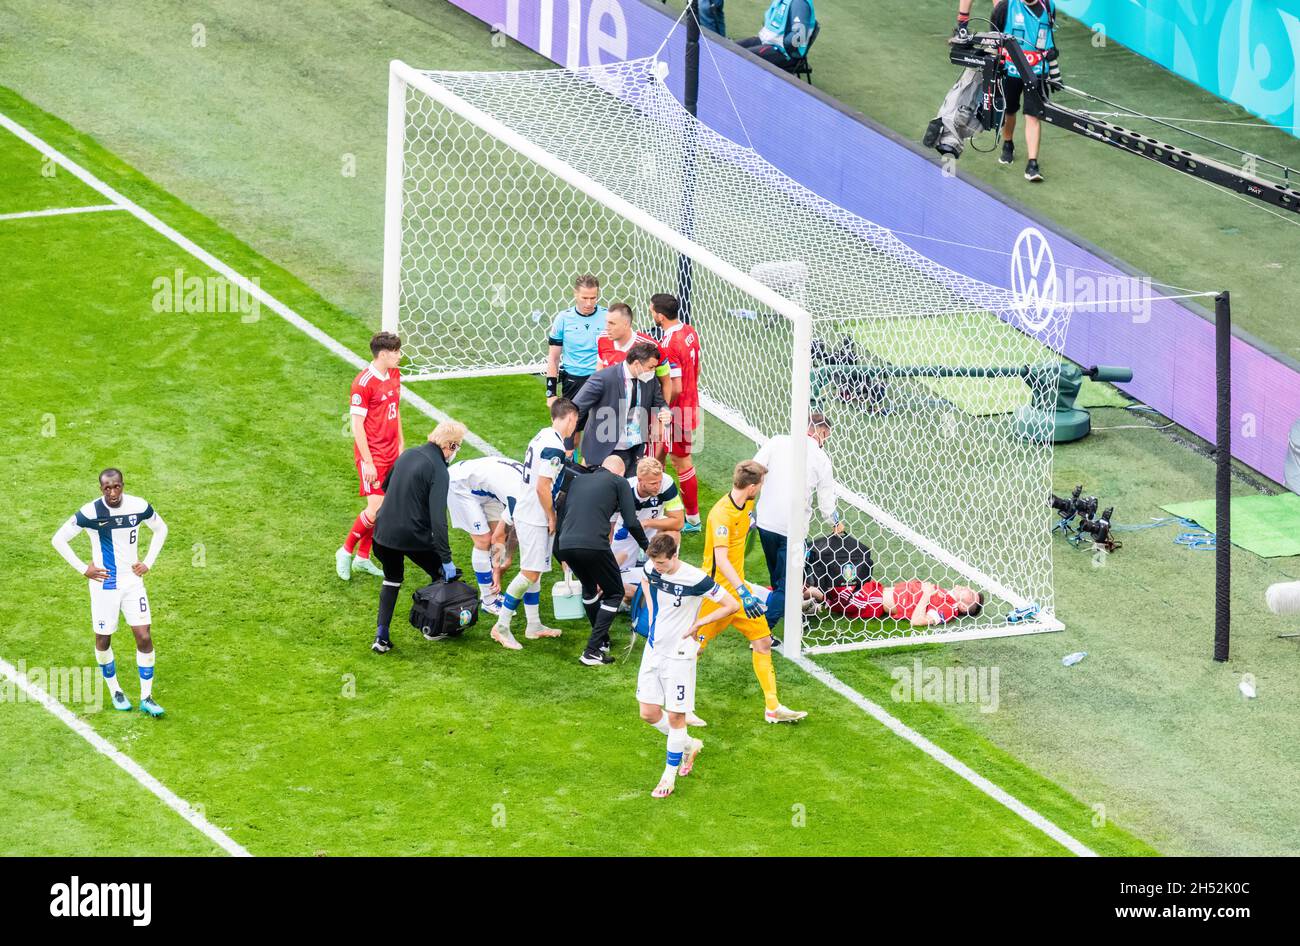 Saint Petersburg, Russia – June 16, 2021. Medical assistance provided to players Jere Uronen and Vyacheslav Karavayev during EURO 2020 match Finland v Stock Photo